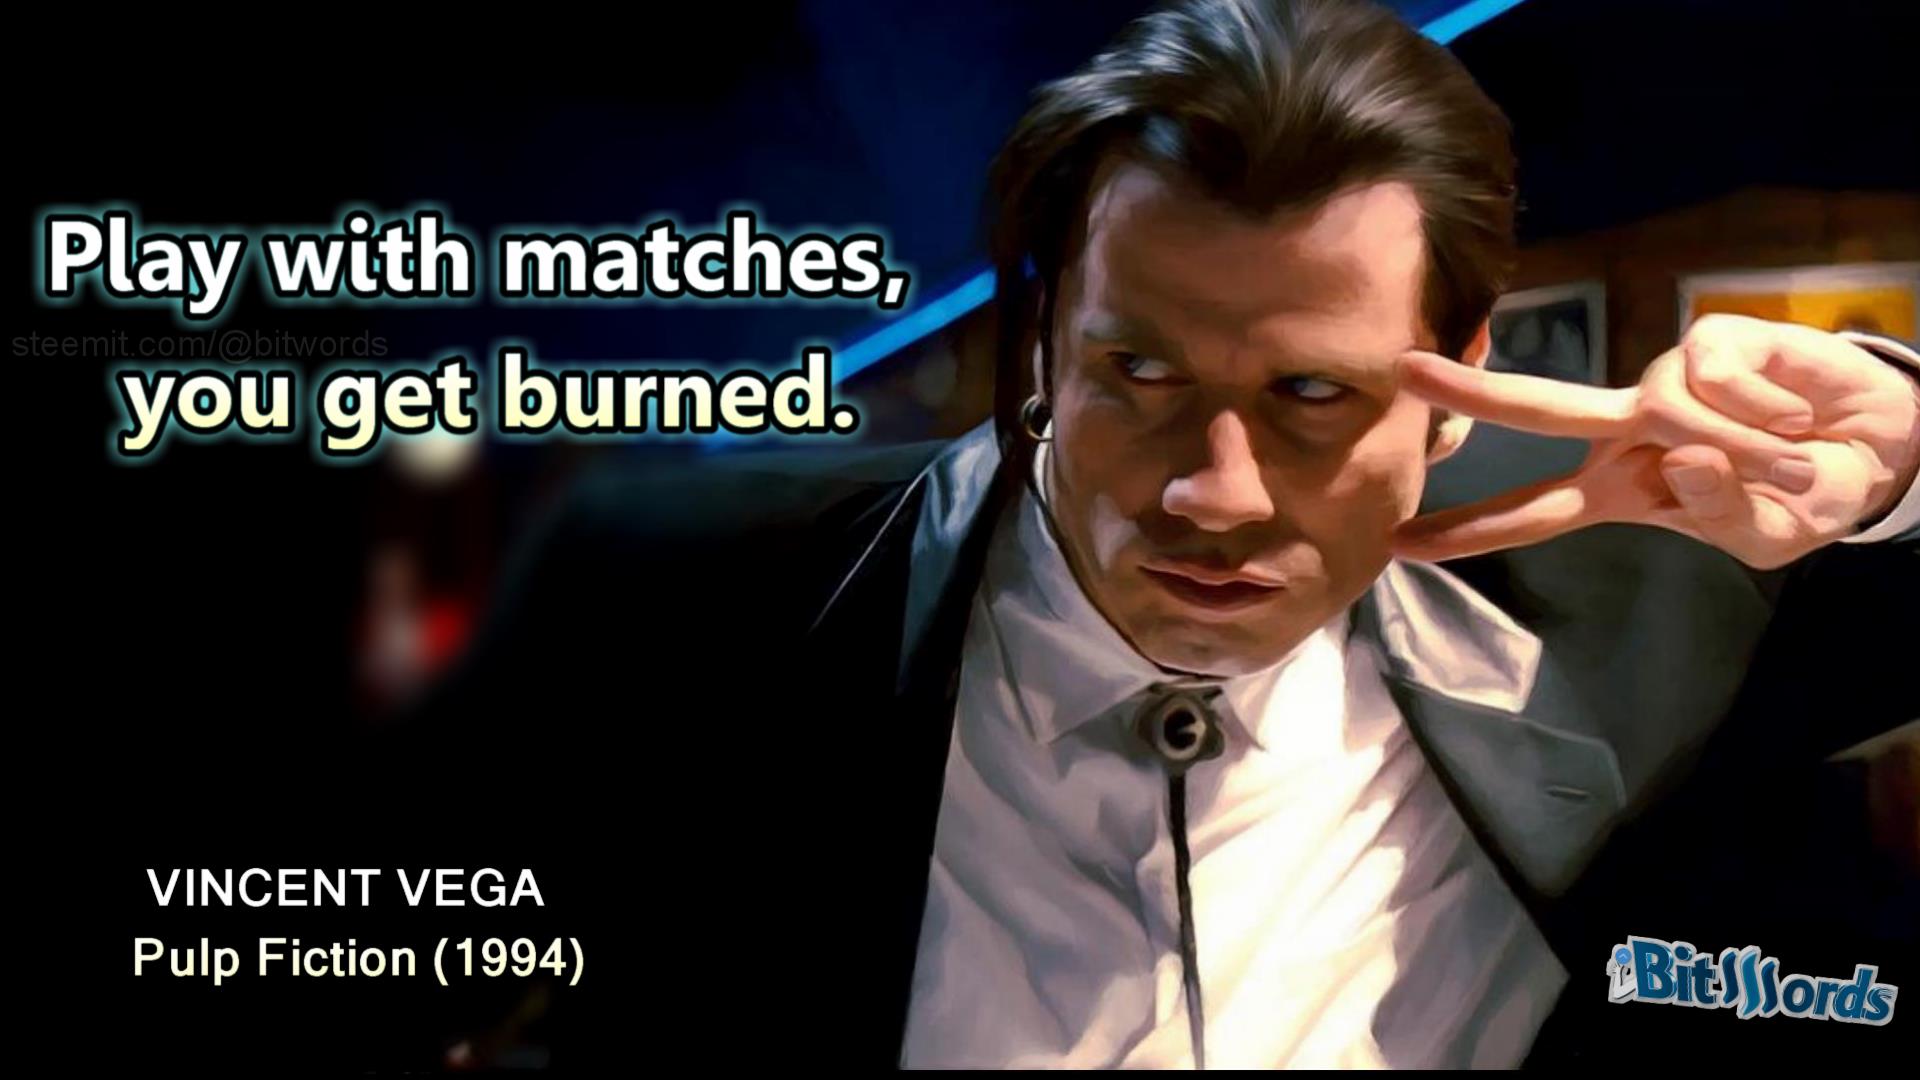 Movie Quote Of The Day Vincent Vega Play With Matches You Get Burned Steemit